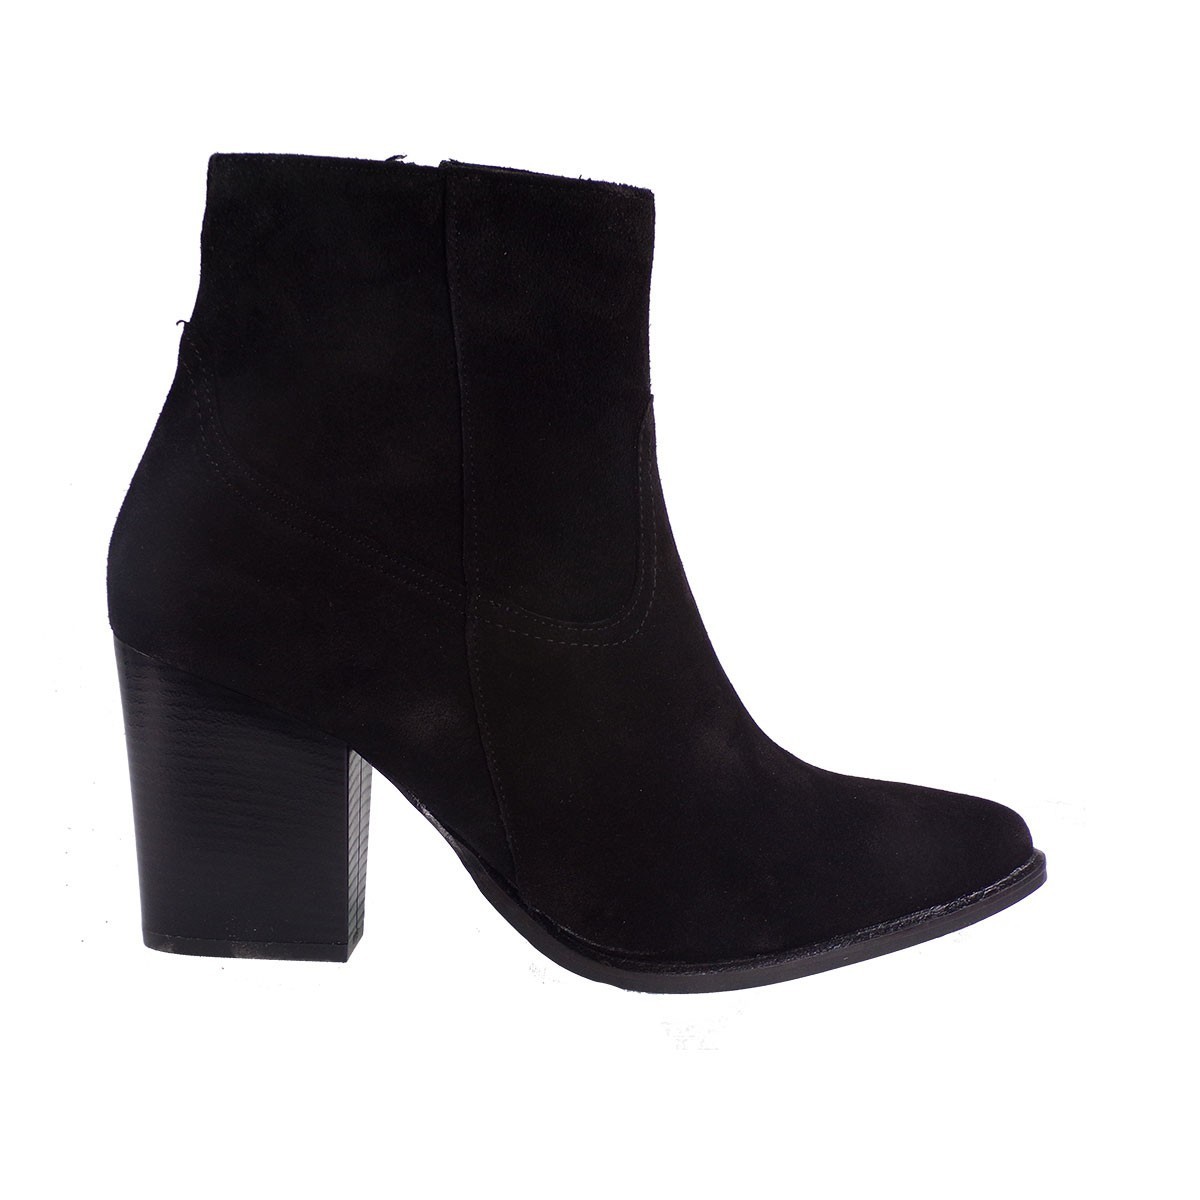 LEATHER SUEDE ANKLE BOOTS 4010 MOOD'S BLACK